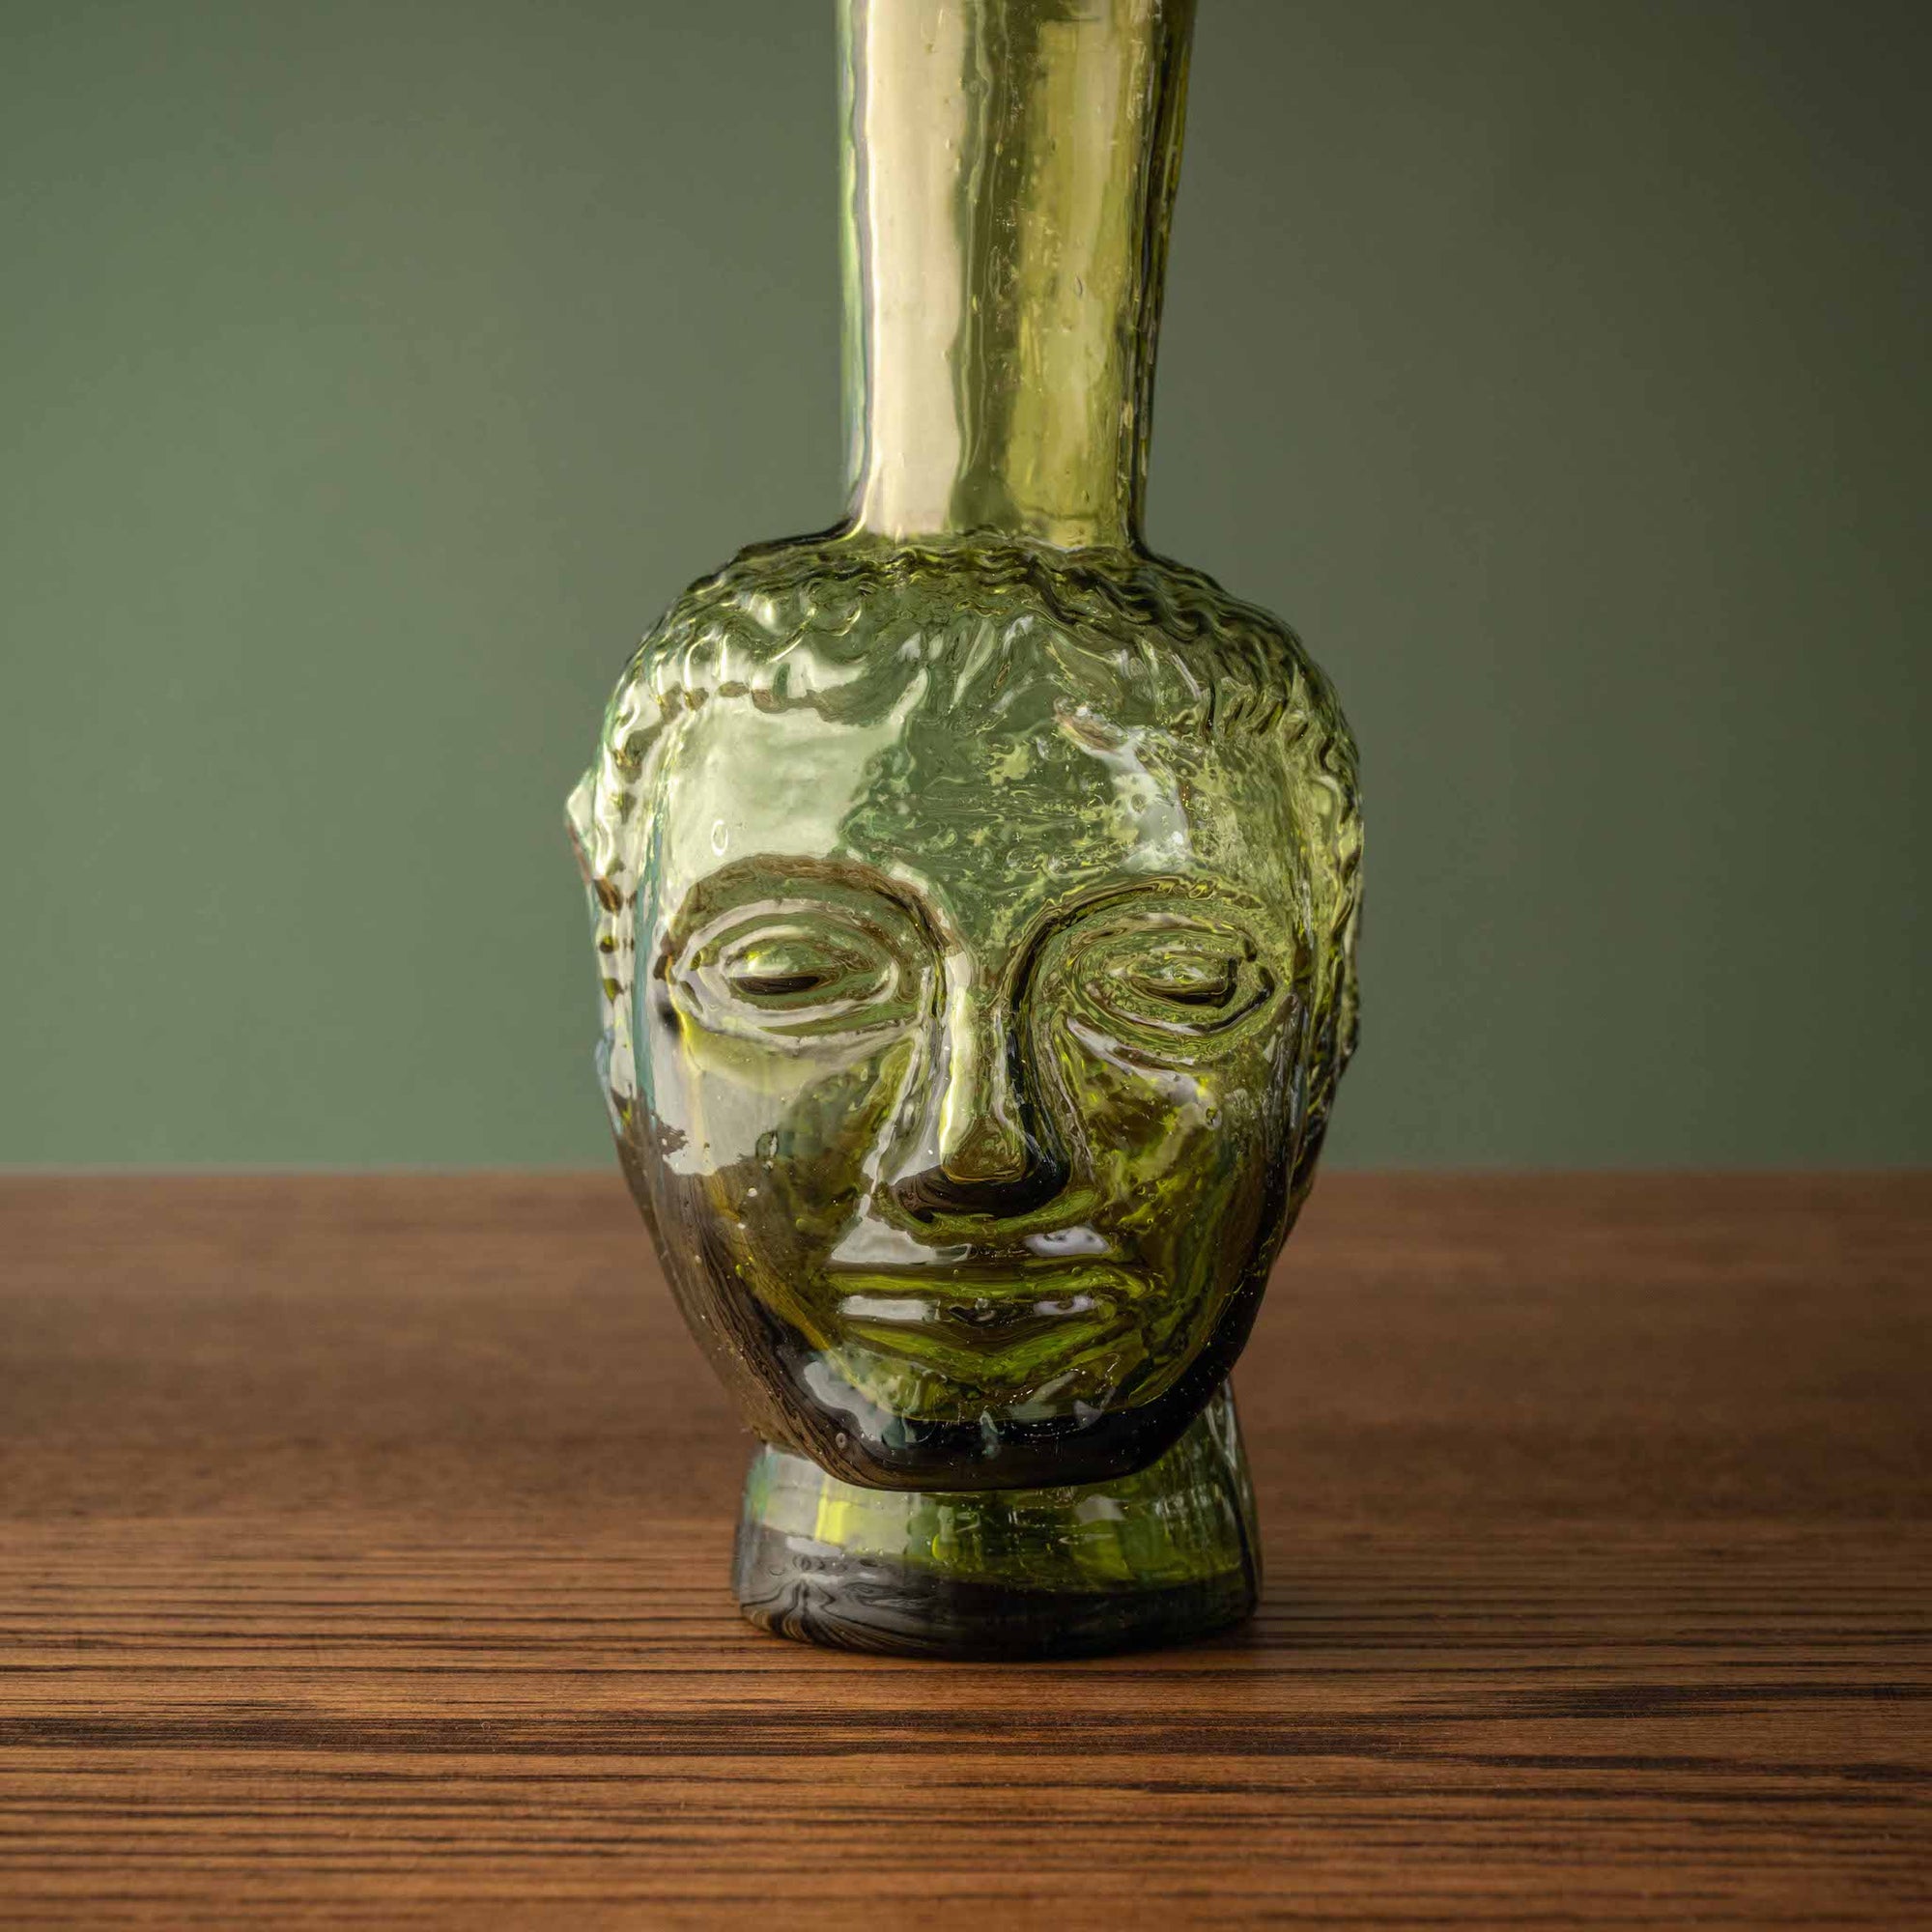 Olive Recycled Glass La Soufflerie Vase Tete Face Close Up